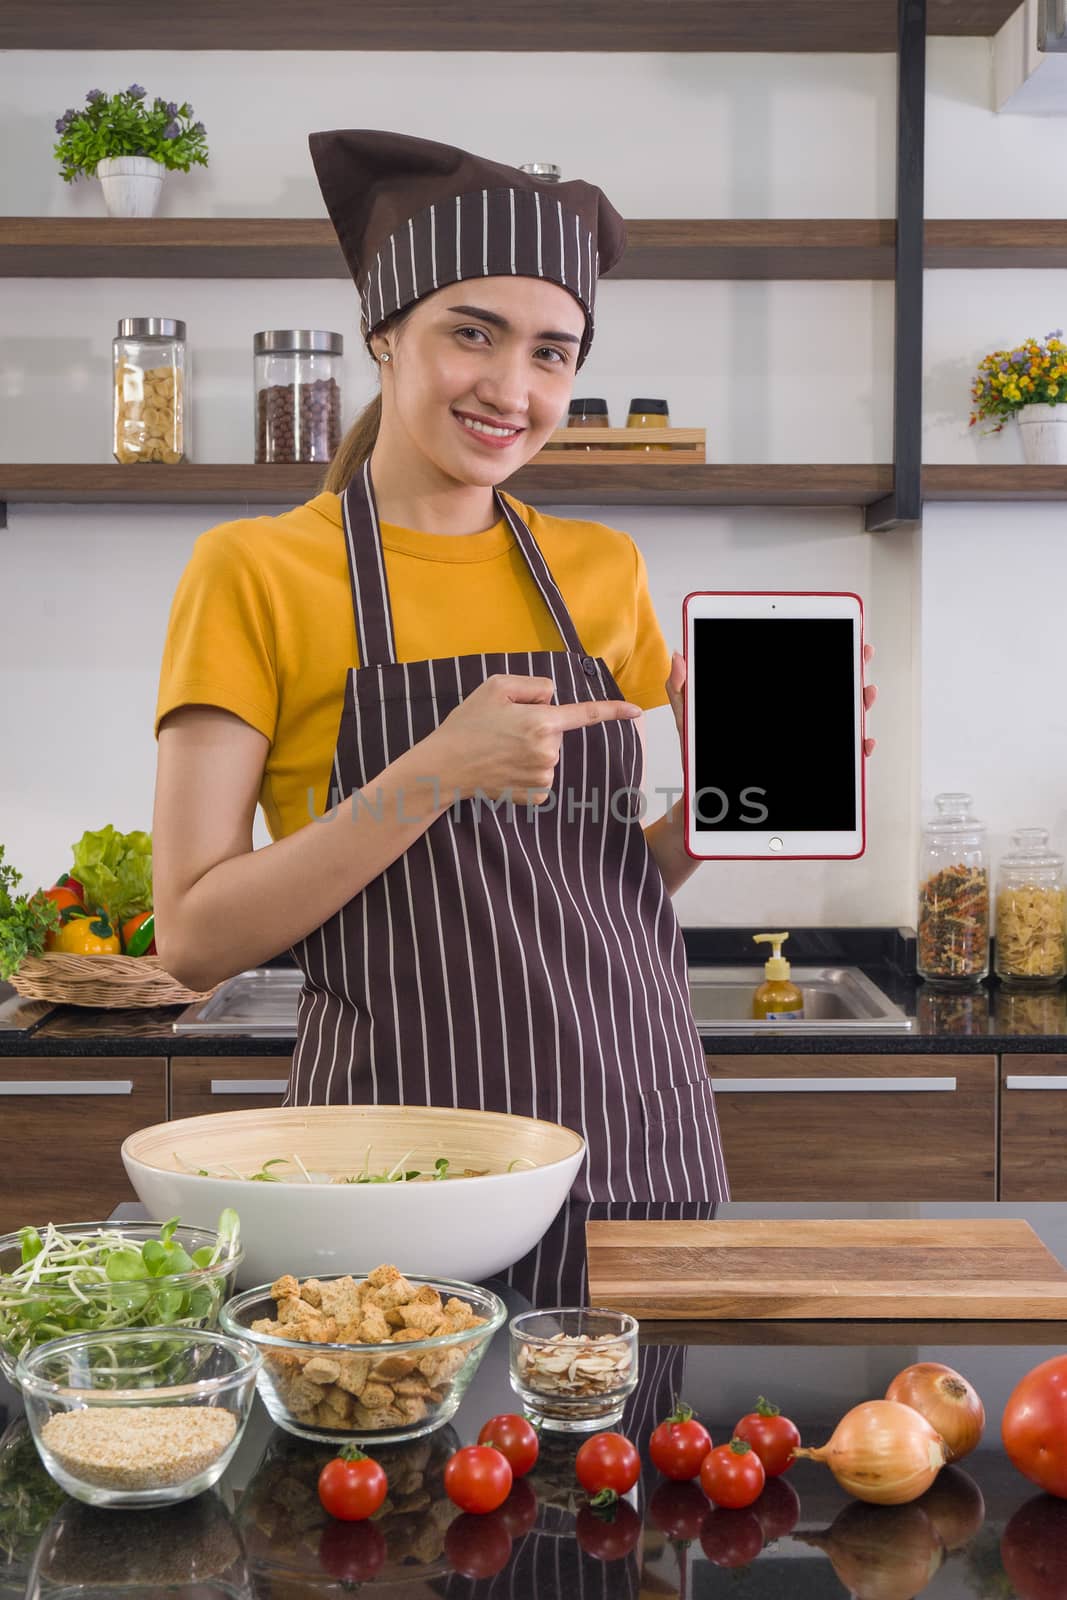 The housewife dressed in an apron and a hair cap, holding blank screen tablet computer. Morning atmosphere in a modern kitchen.